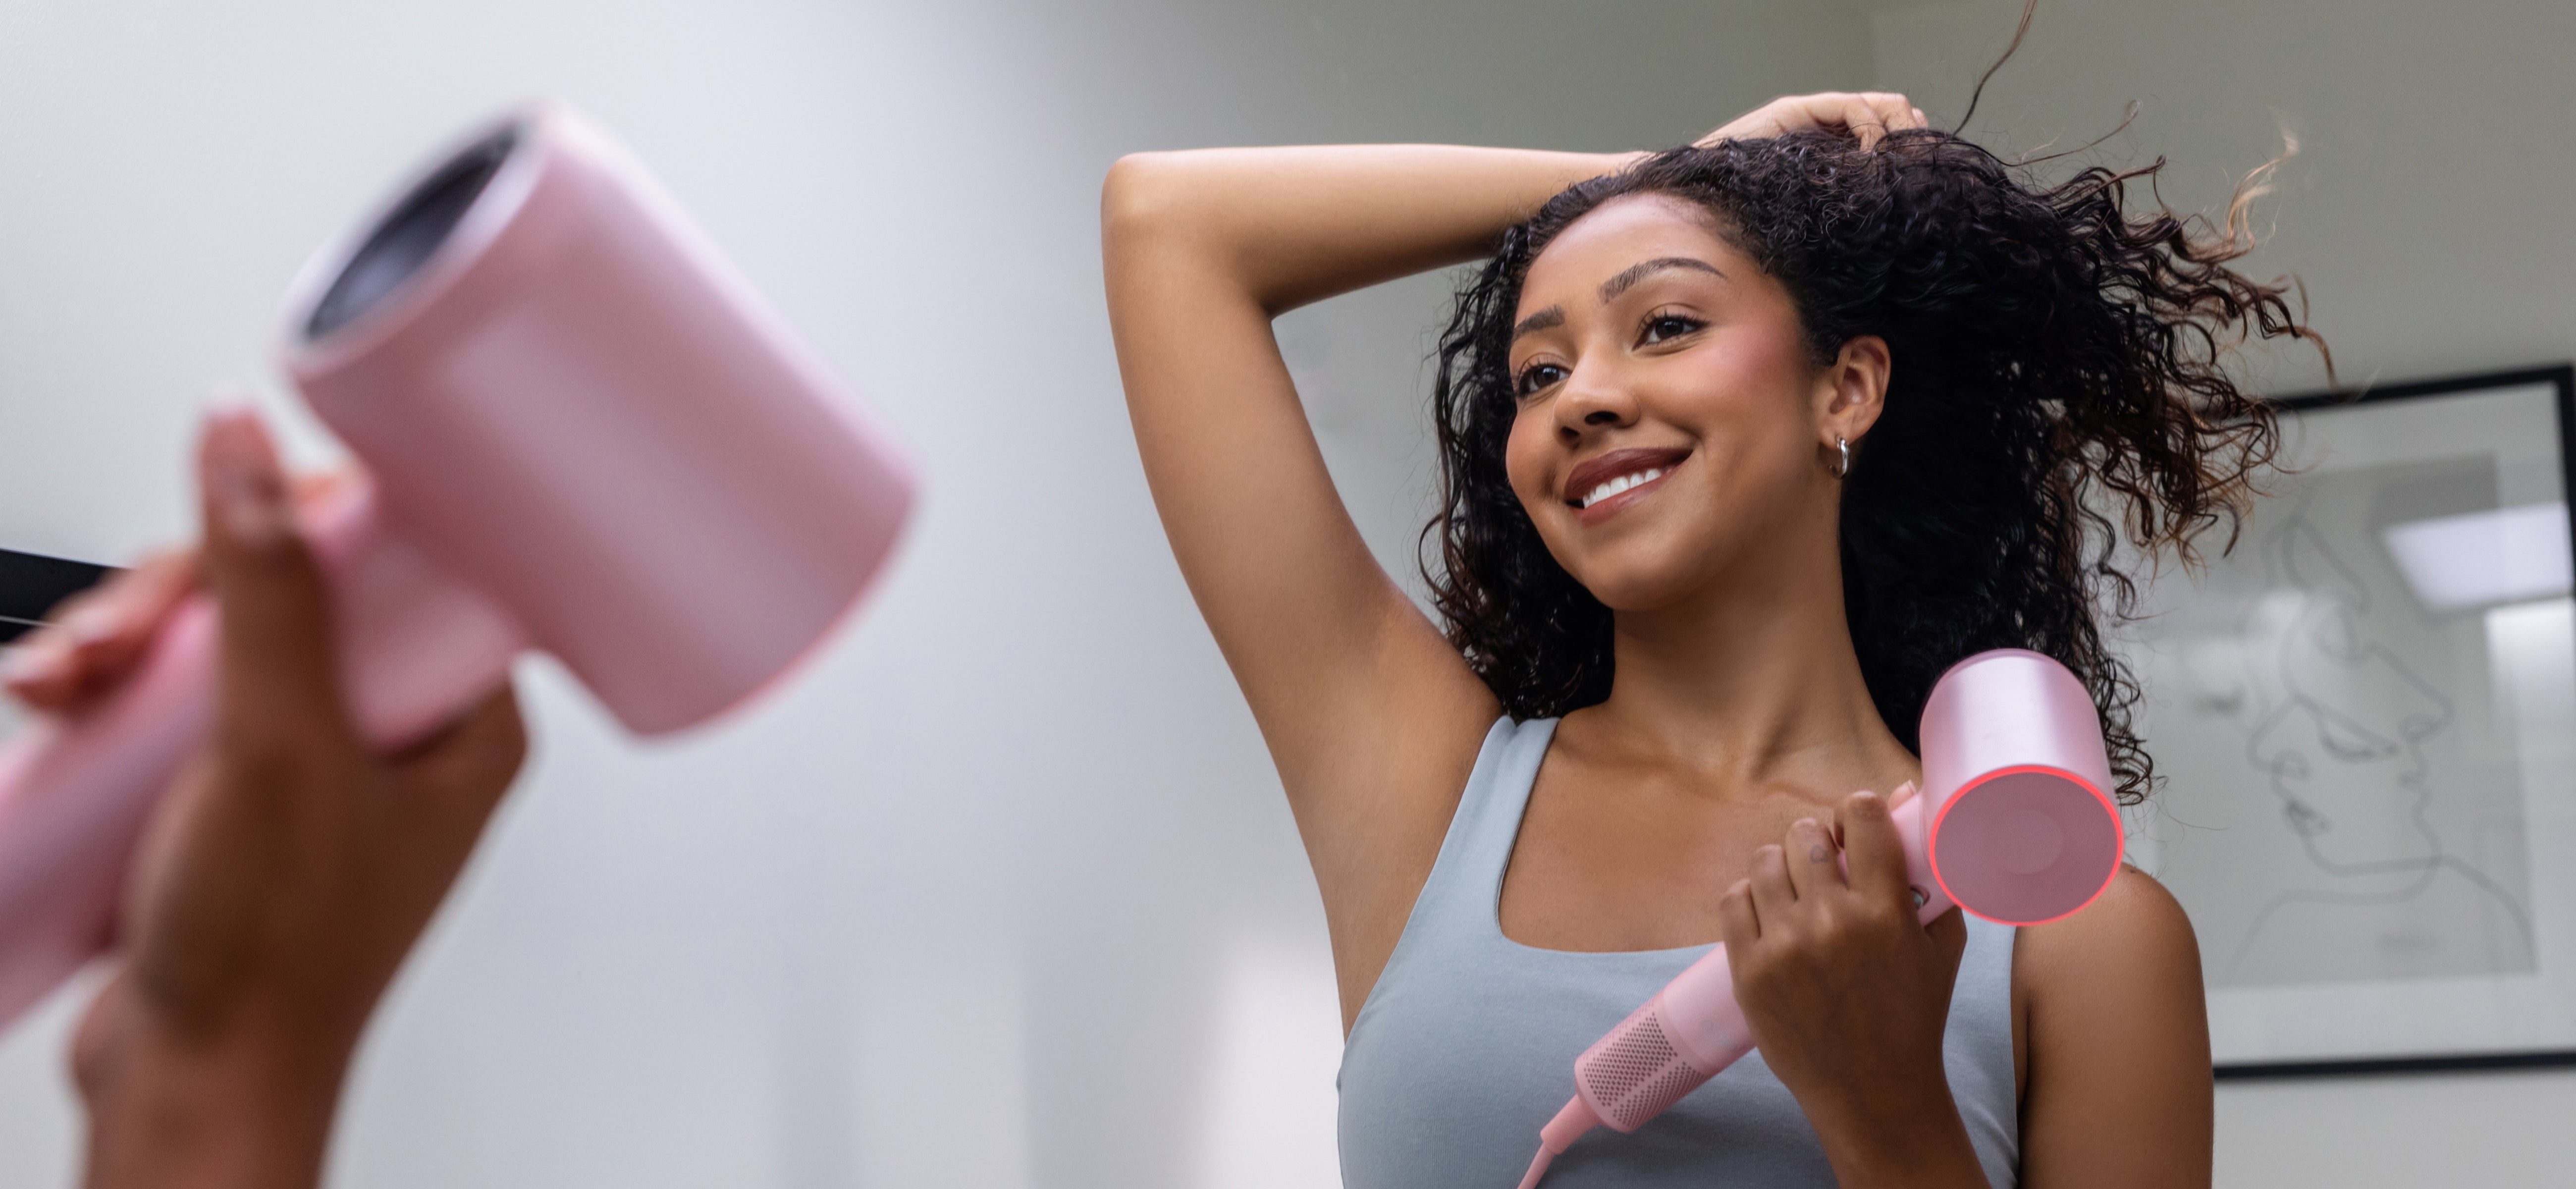 Best hair dryers for curly hair you can choose from